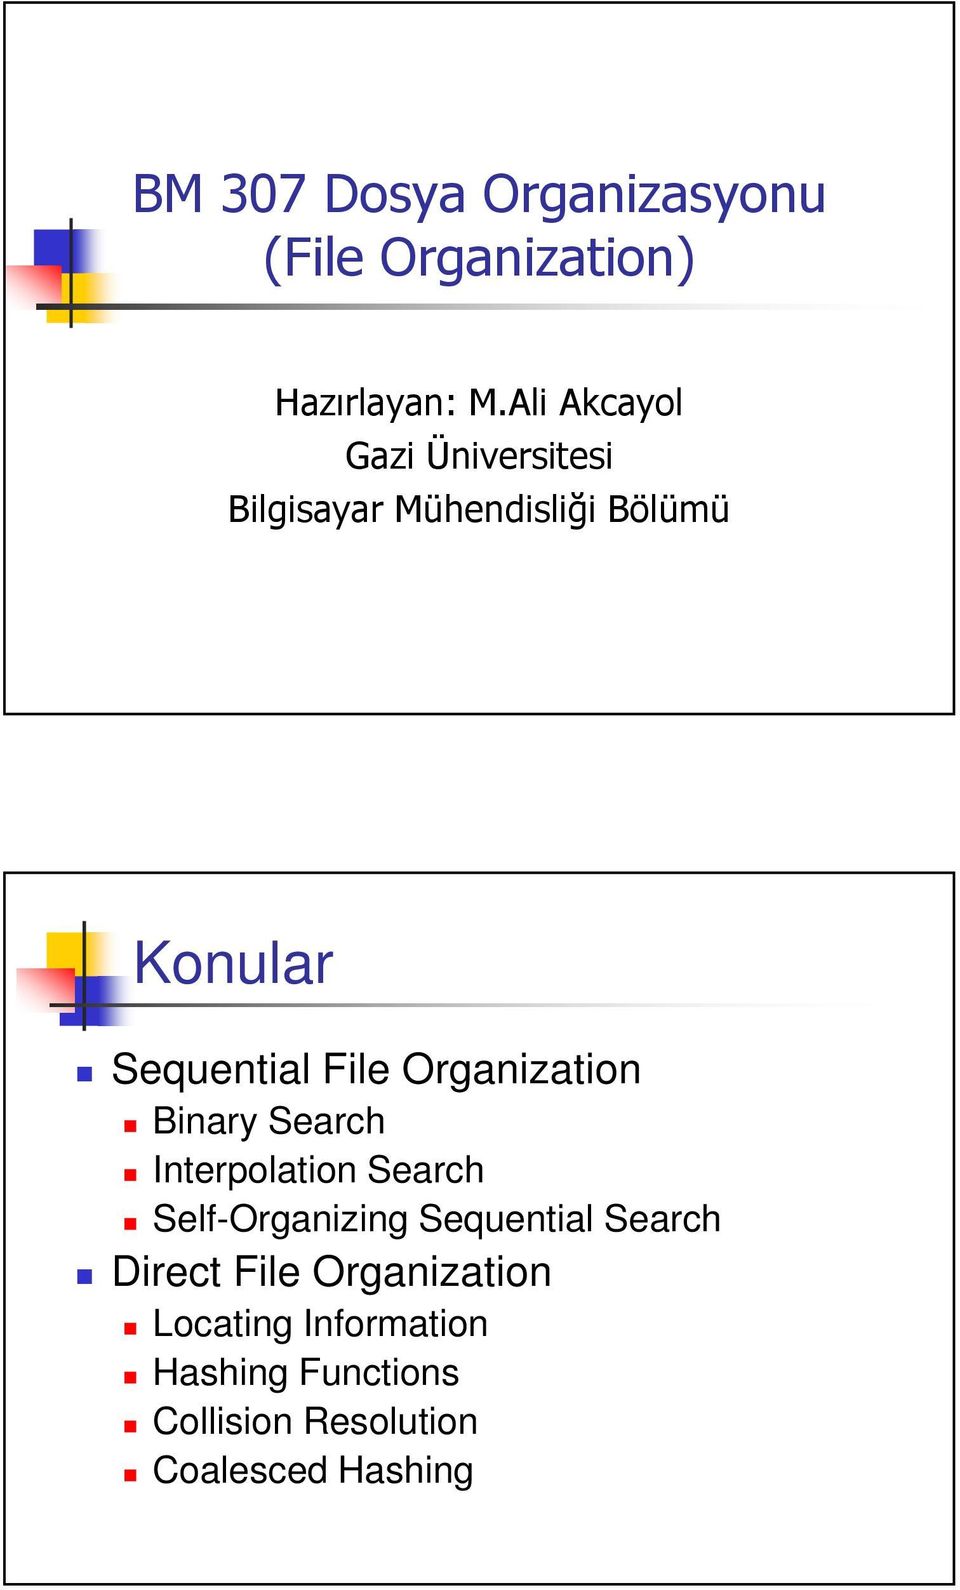 Search Self-Organizing Sequential Search